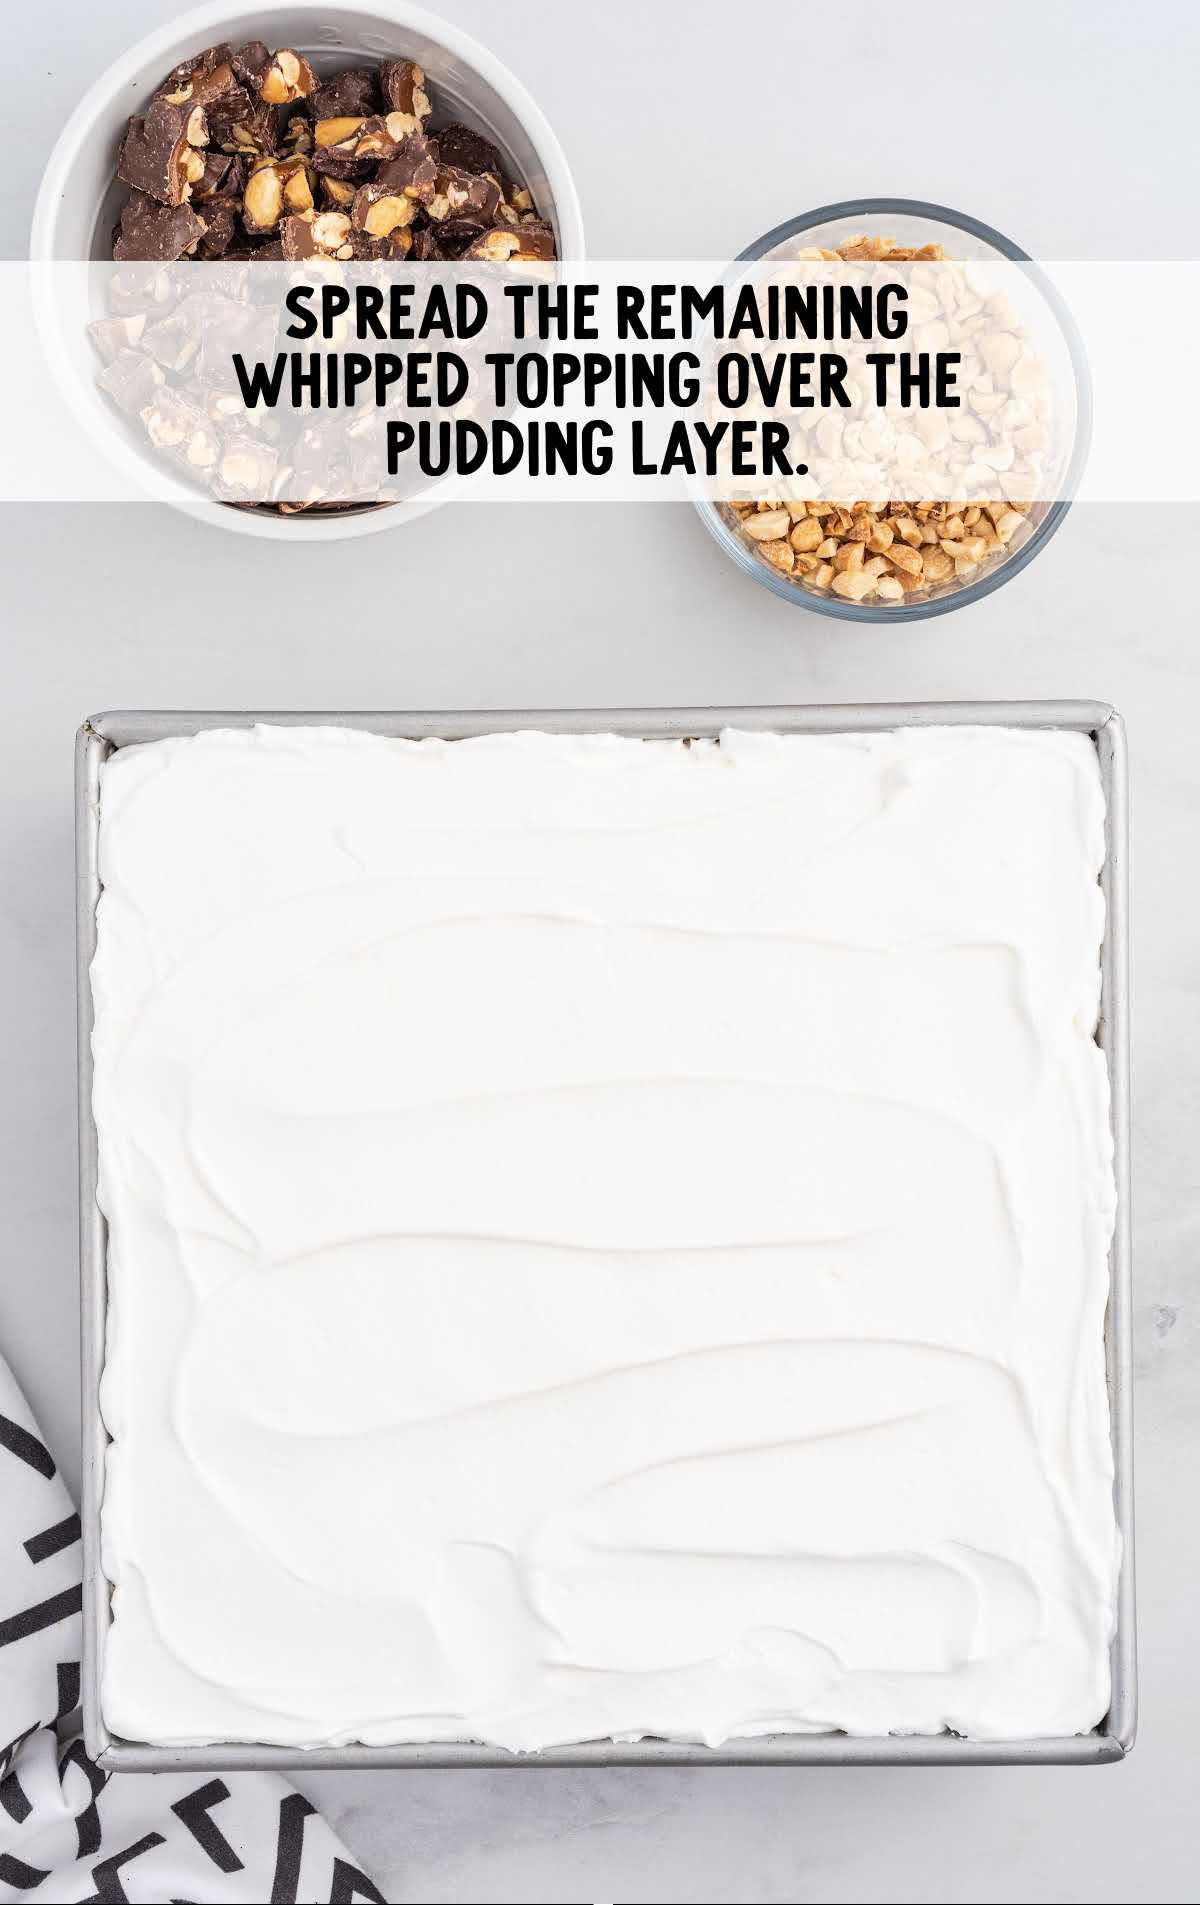 whipped topping spread over the pudding layer in a baking dish